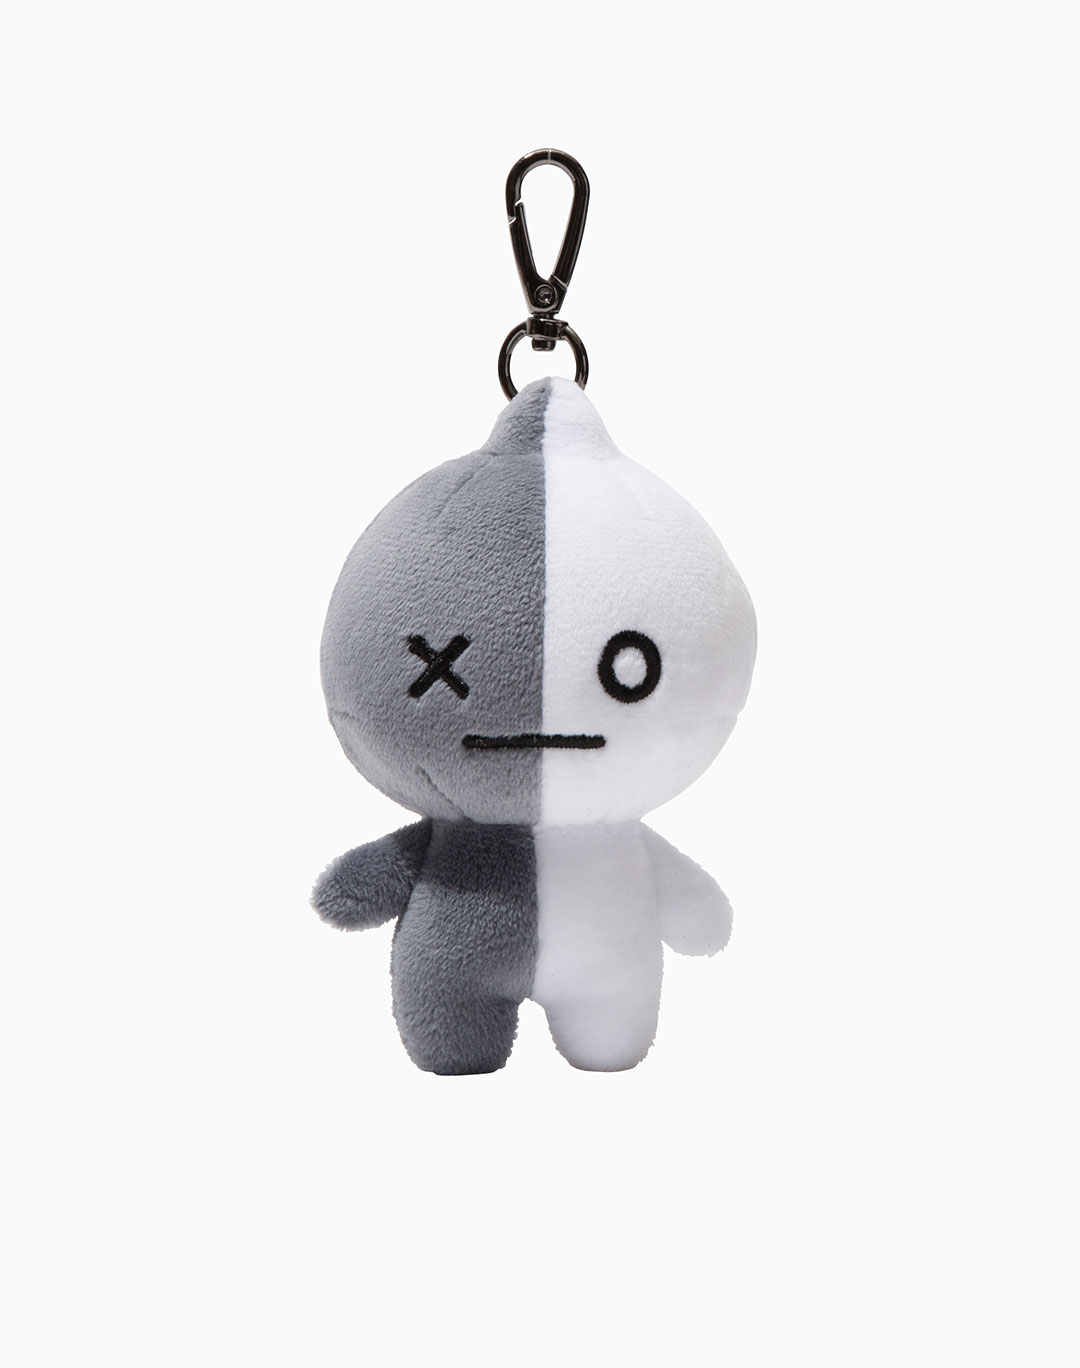 BT21 Plushies, BT21 Merchandise Plush Doll Toy Gift for Fans